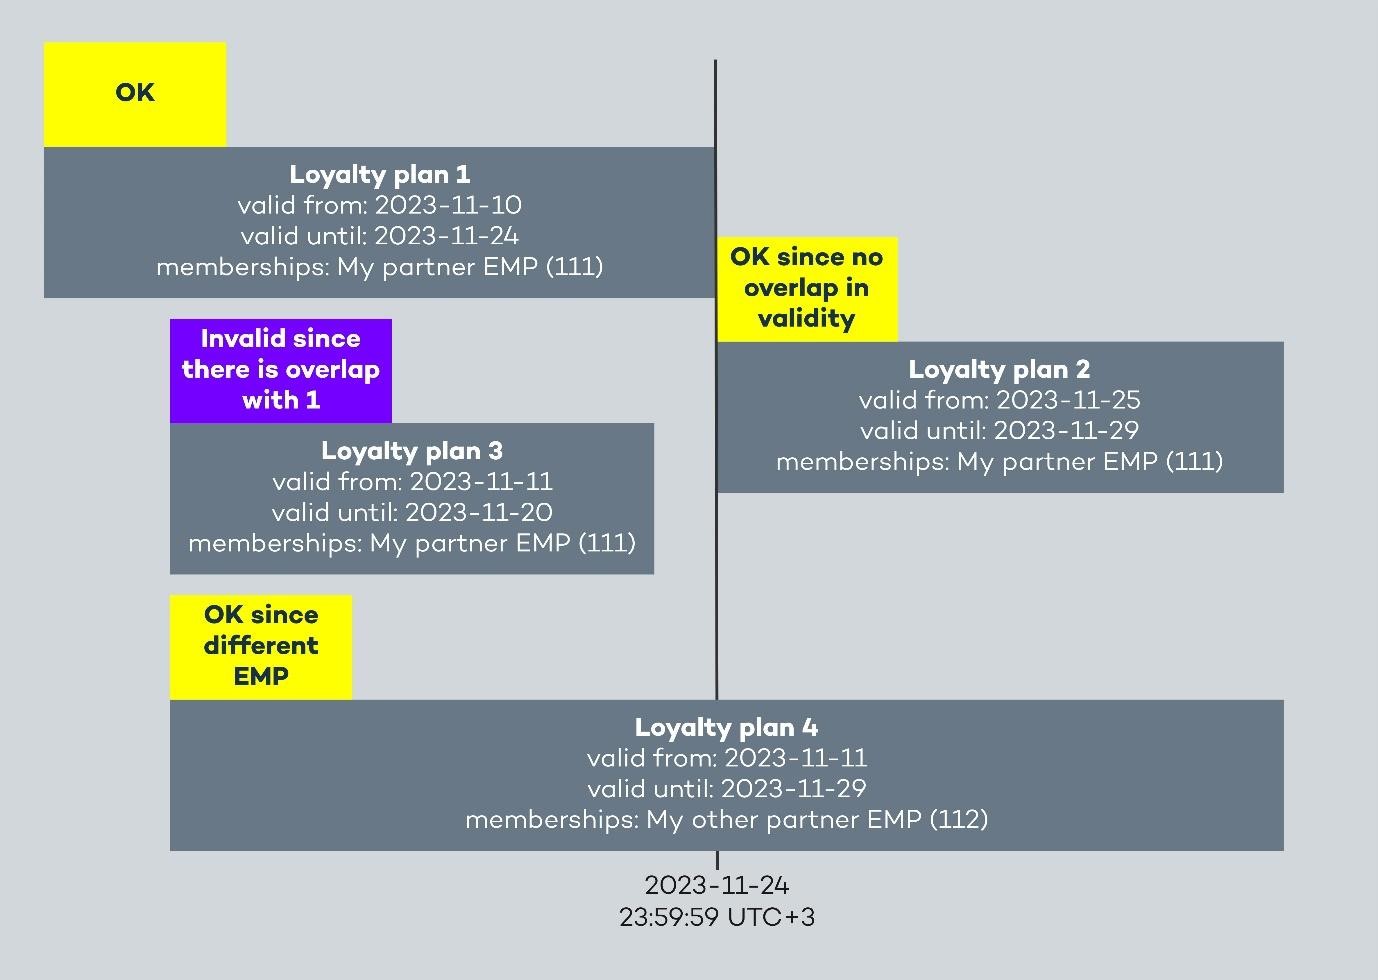 A diagram of a company loyalty plan

Description automatically generated